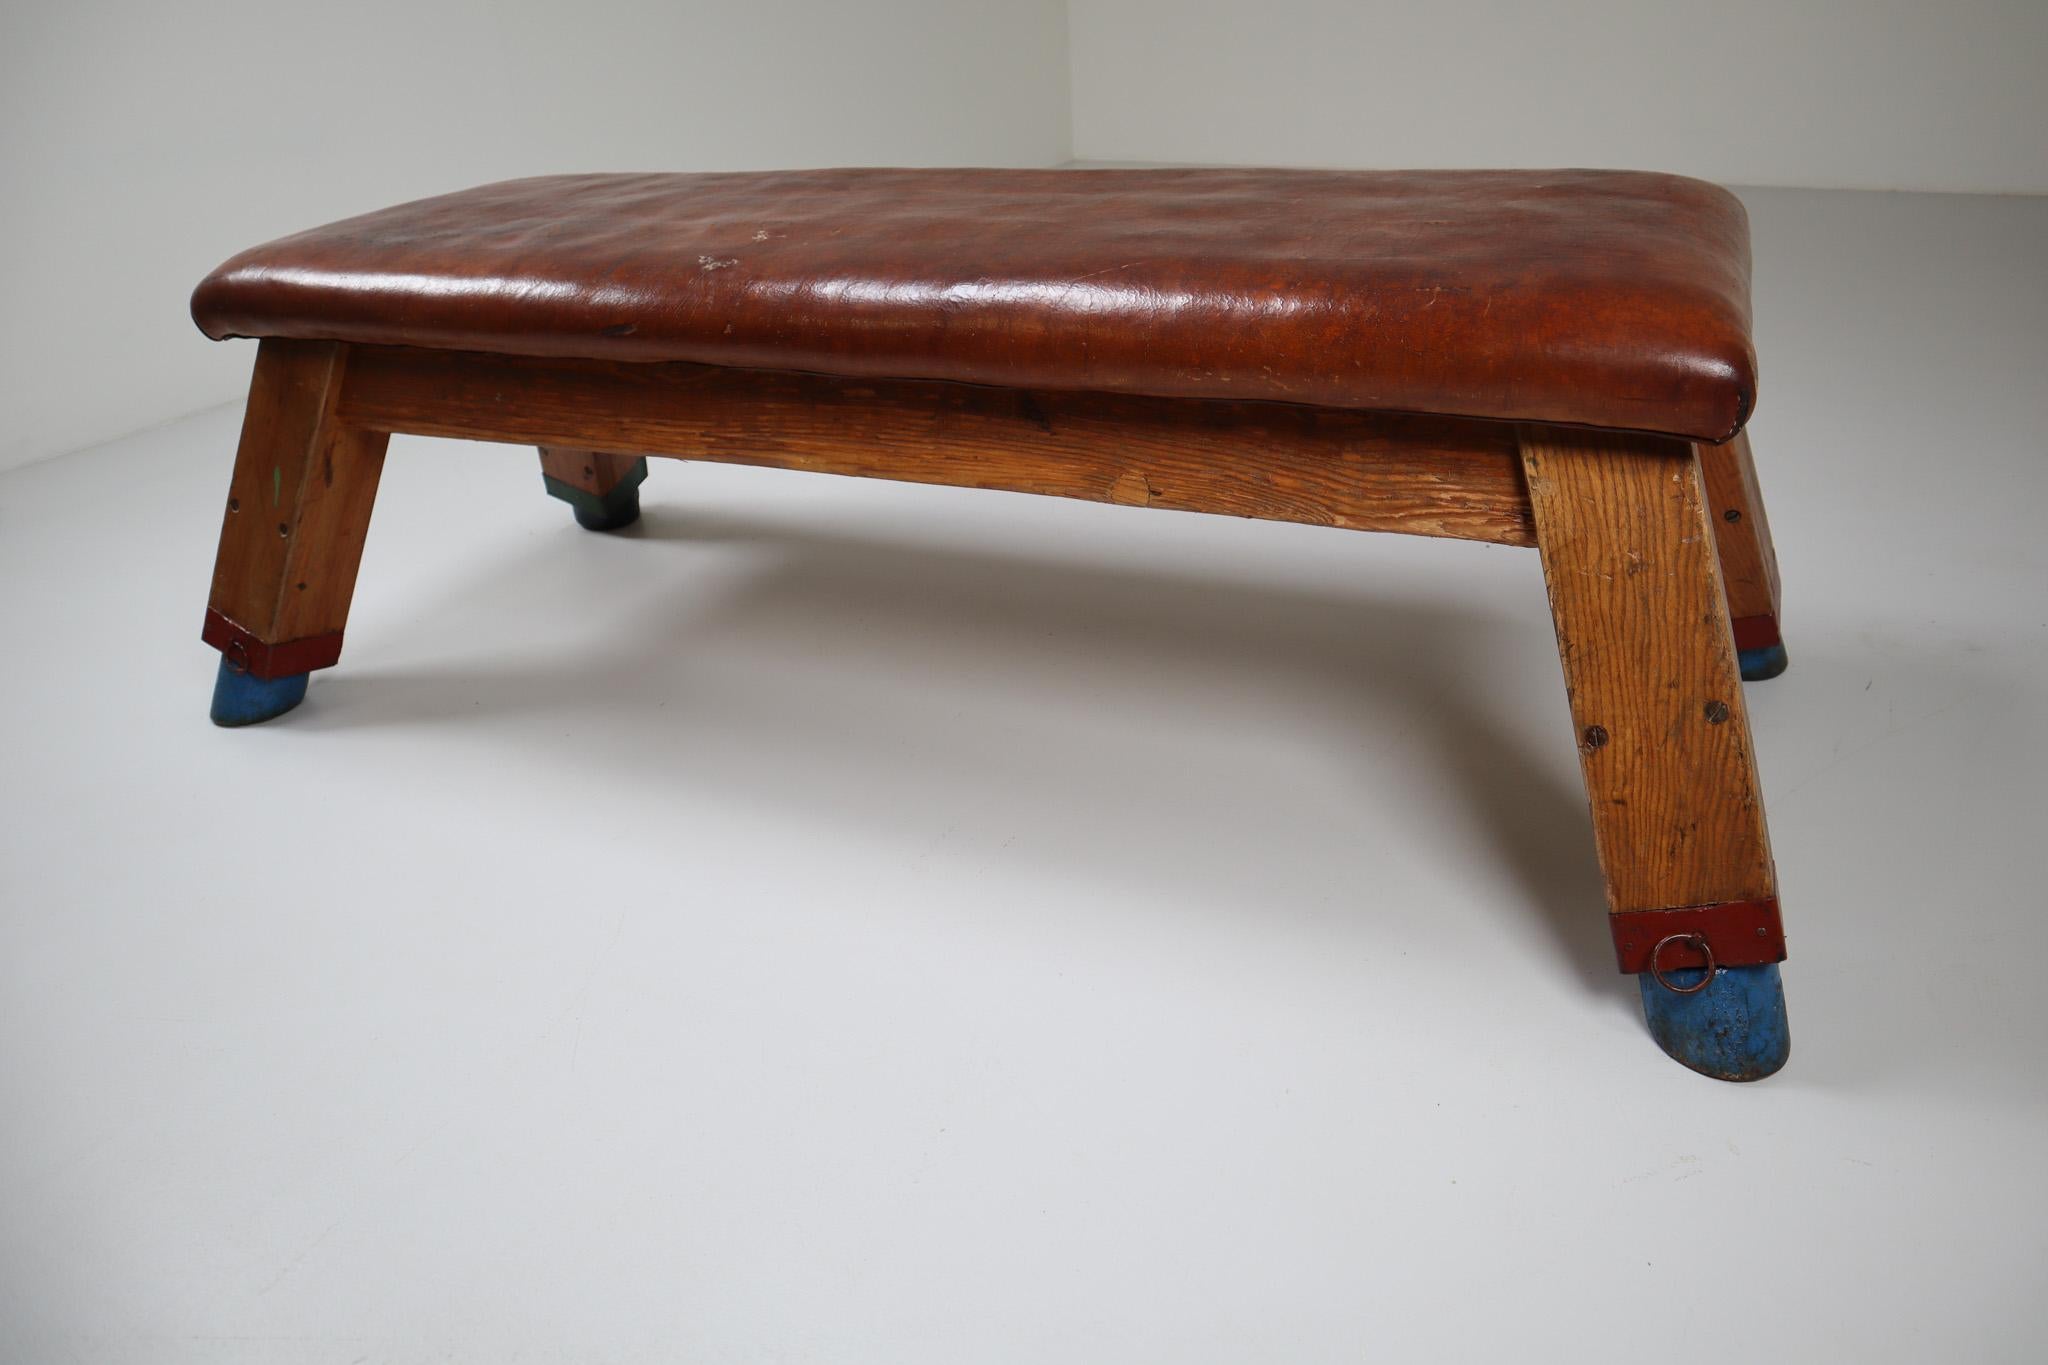 Strong, vintage European gymnasium bench with a patinated leather covered top that sits in to the bench's solid wooden frame. The gym bench frame maintains its original markings where the straps and rings were once held. Can be used as a coffee,